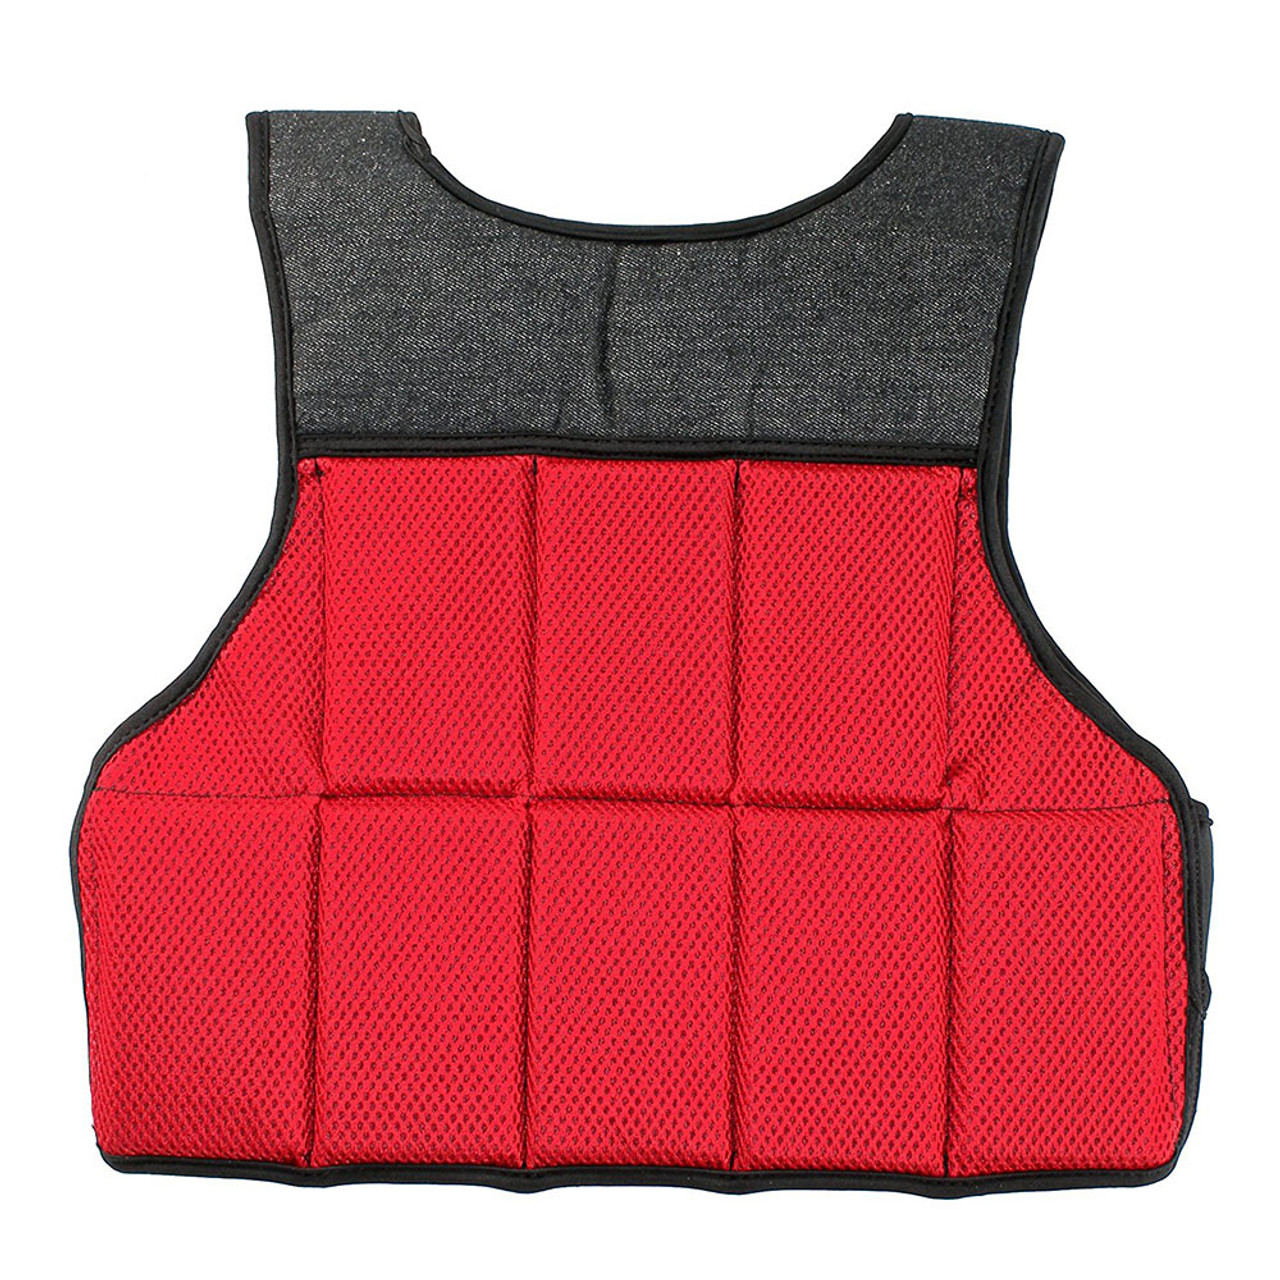 The Bionic Body Weight Vest is Adaptable to your convenience